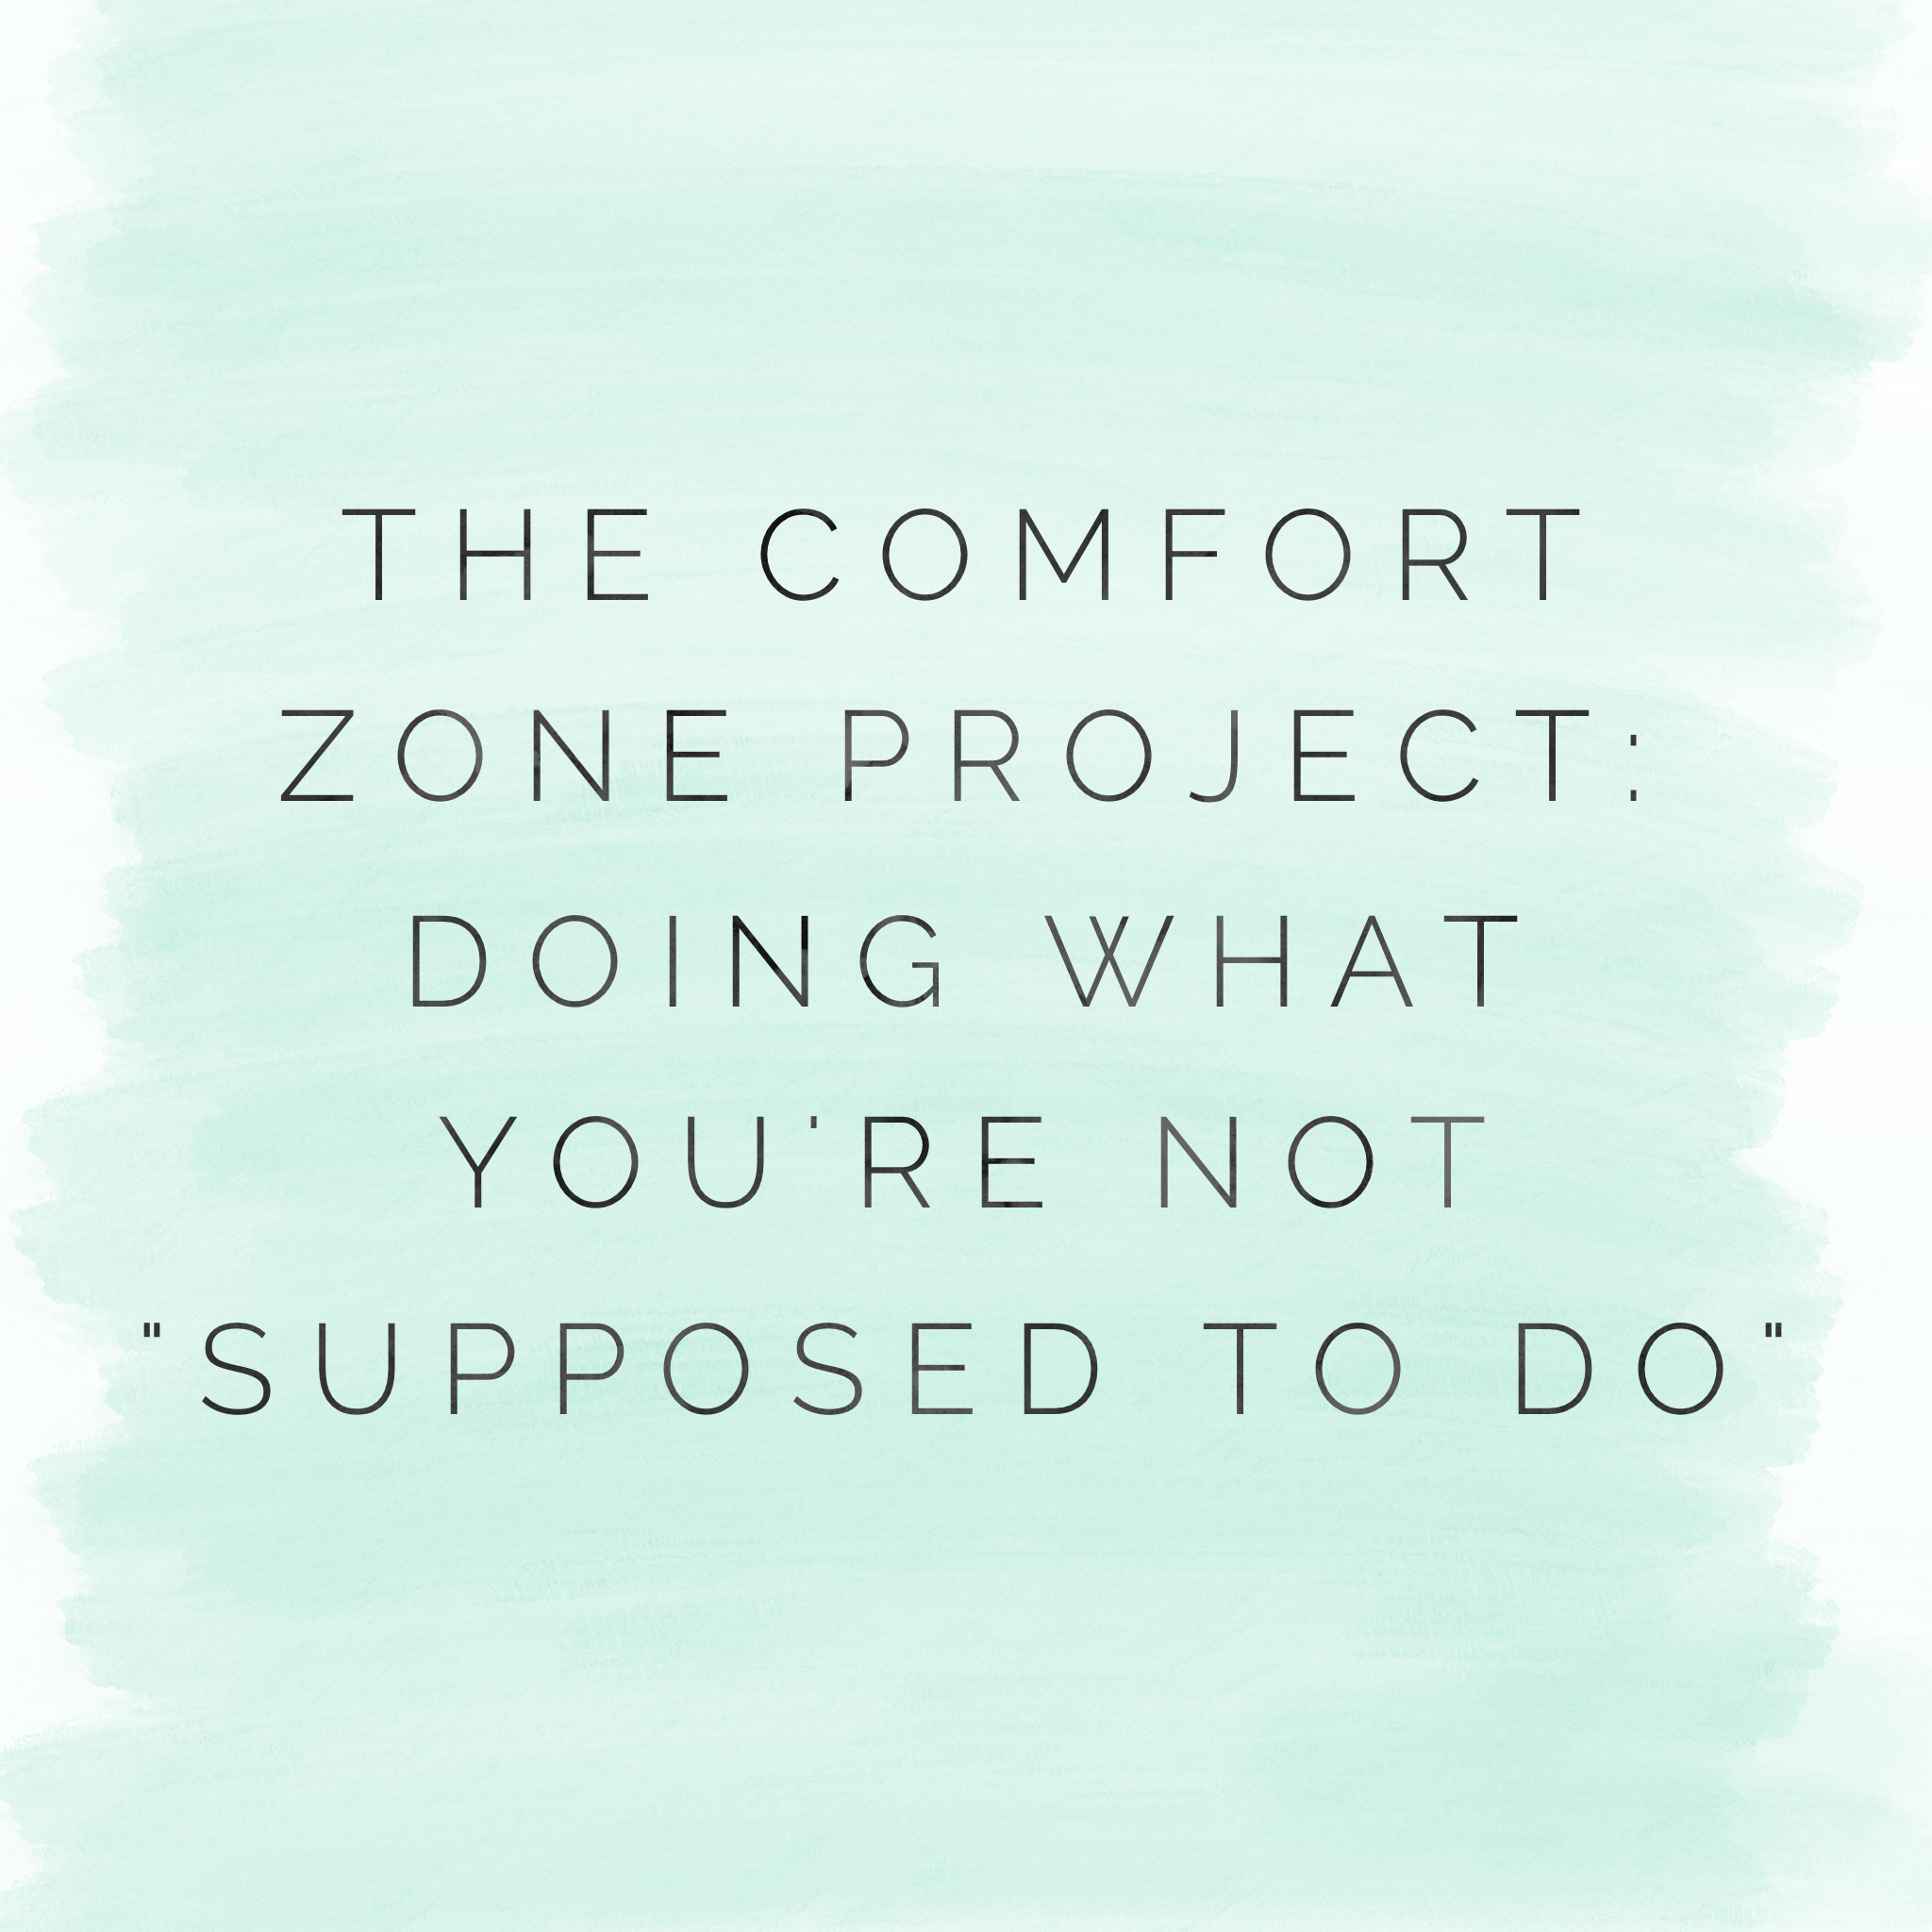 The Comfort Zone Project: Doing What you’re Not “Supposed to Do”